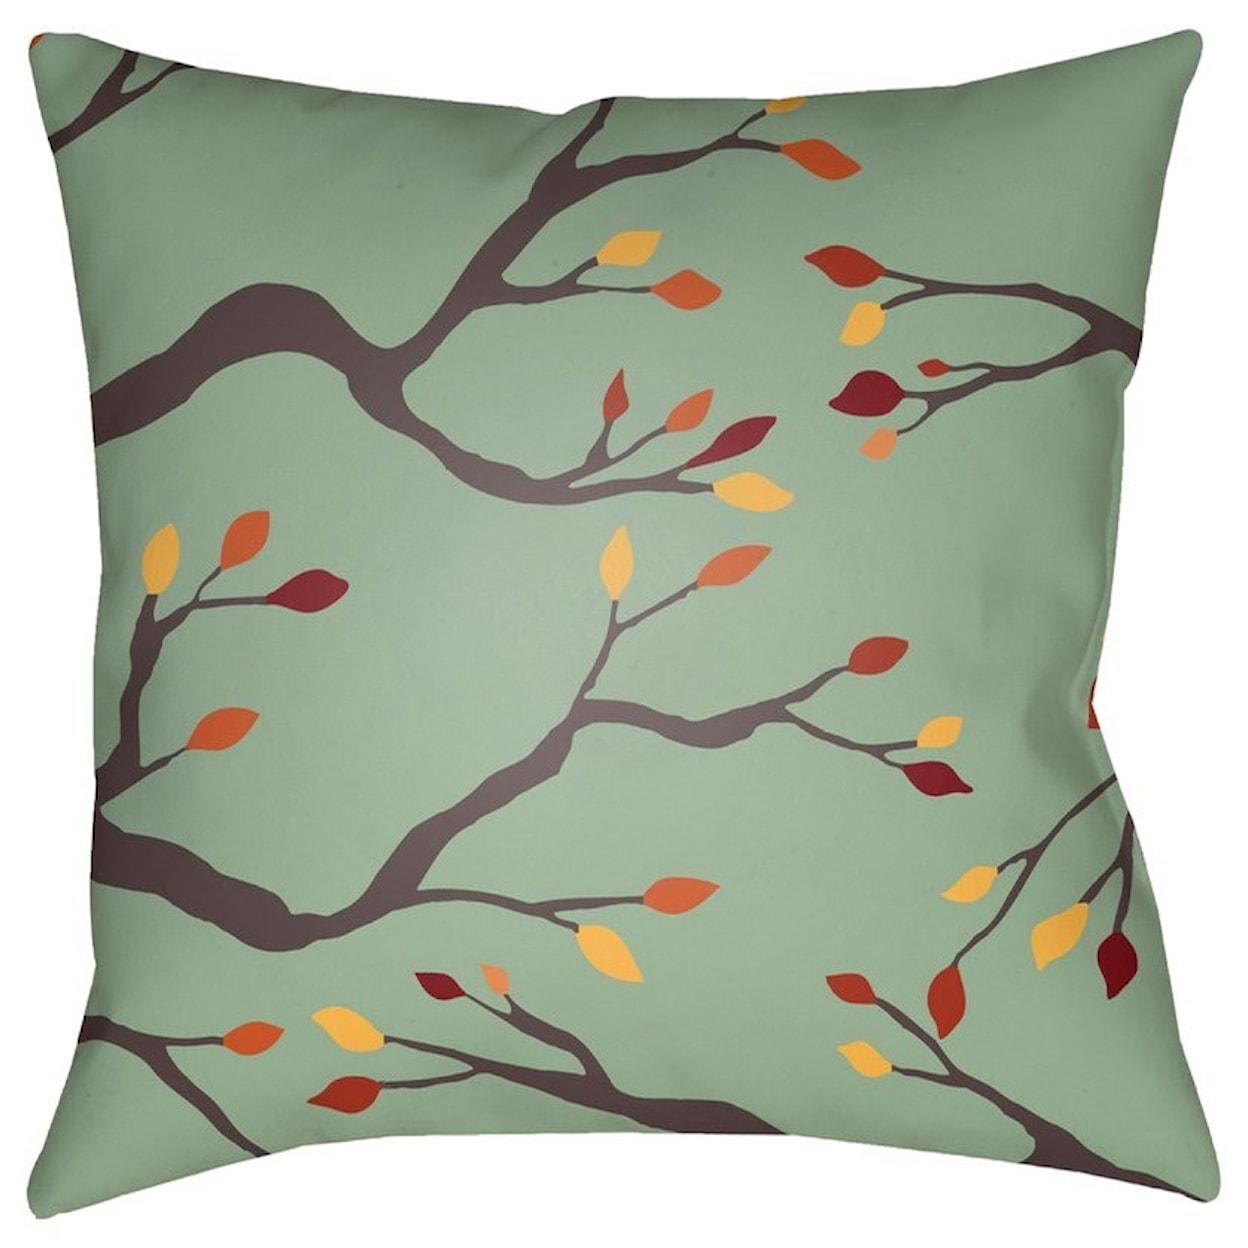 Surya Branches 20 x 20 x 4 Polyester Throw Pillow